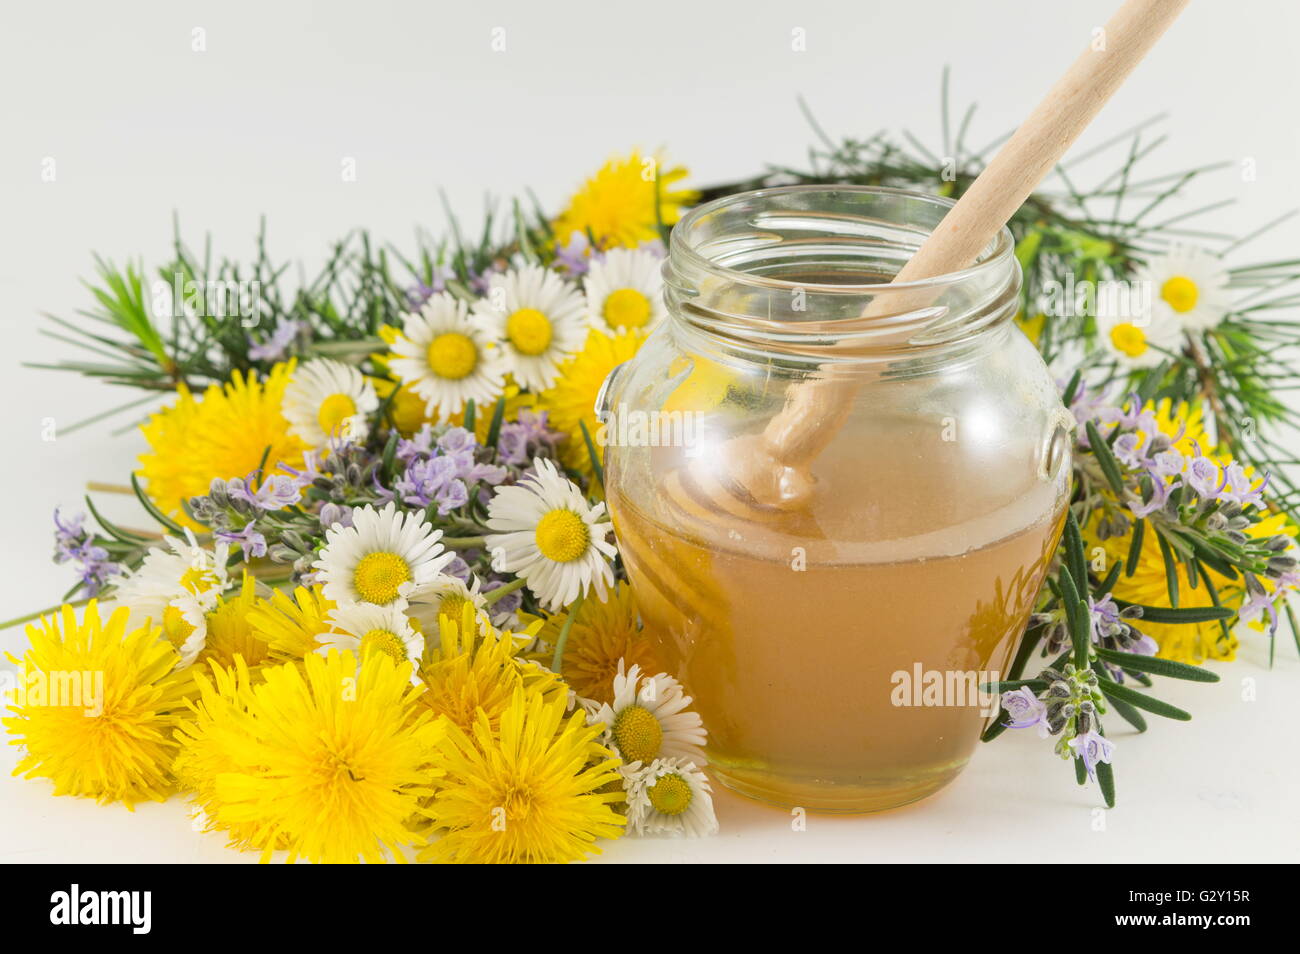 Fresh flowers and a jar of sweet honey Stock Photo